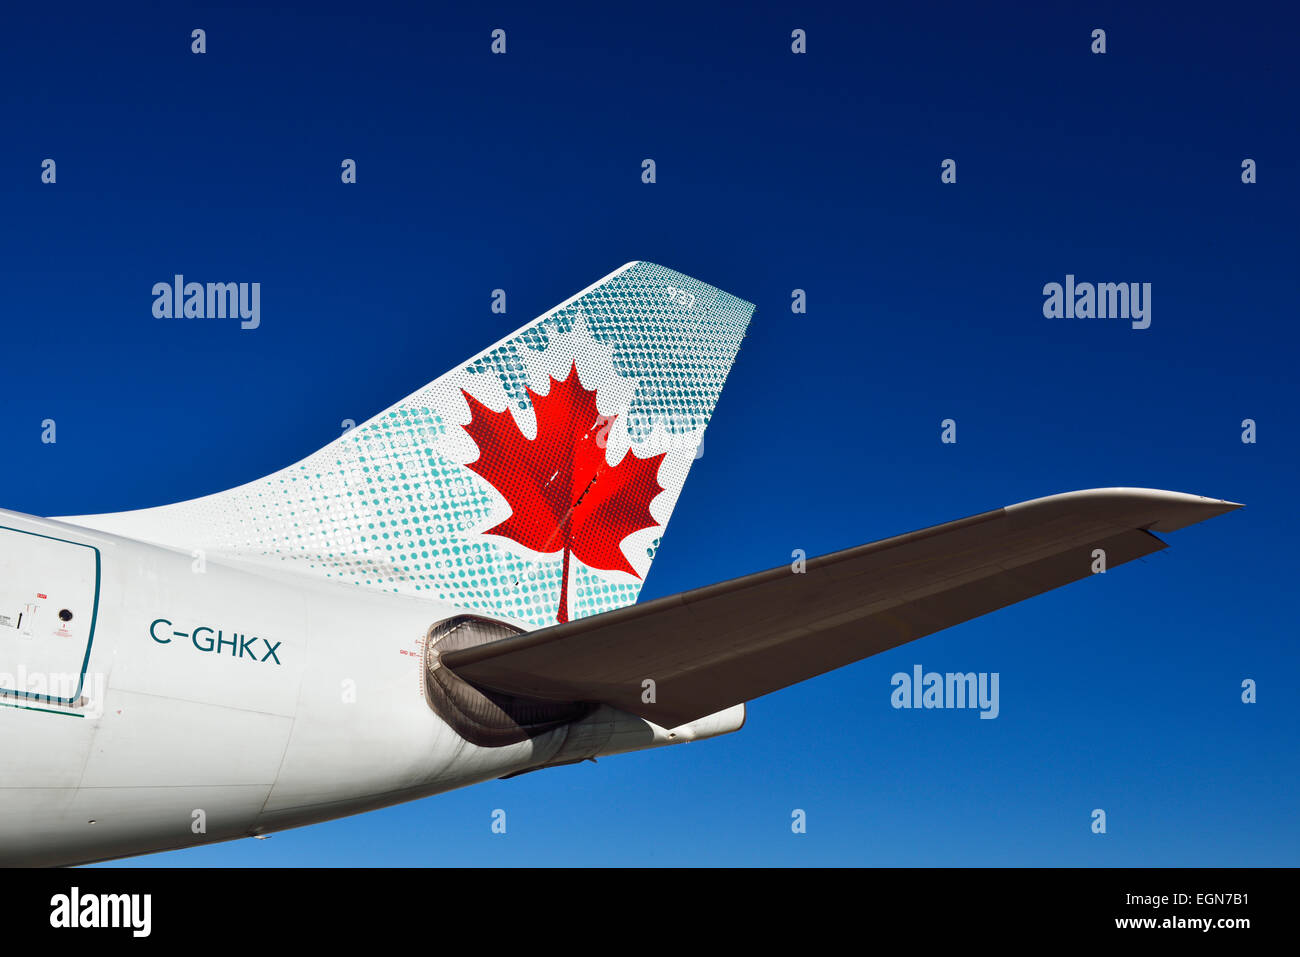 air canada, airbus, A 330-200, aircraft, airplane, plane, wing, winglet, horizontal stabilizer, sun, blue sky, traffic, Stock Photo